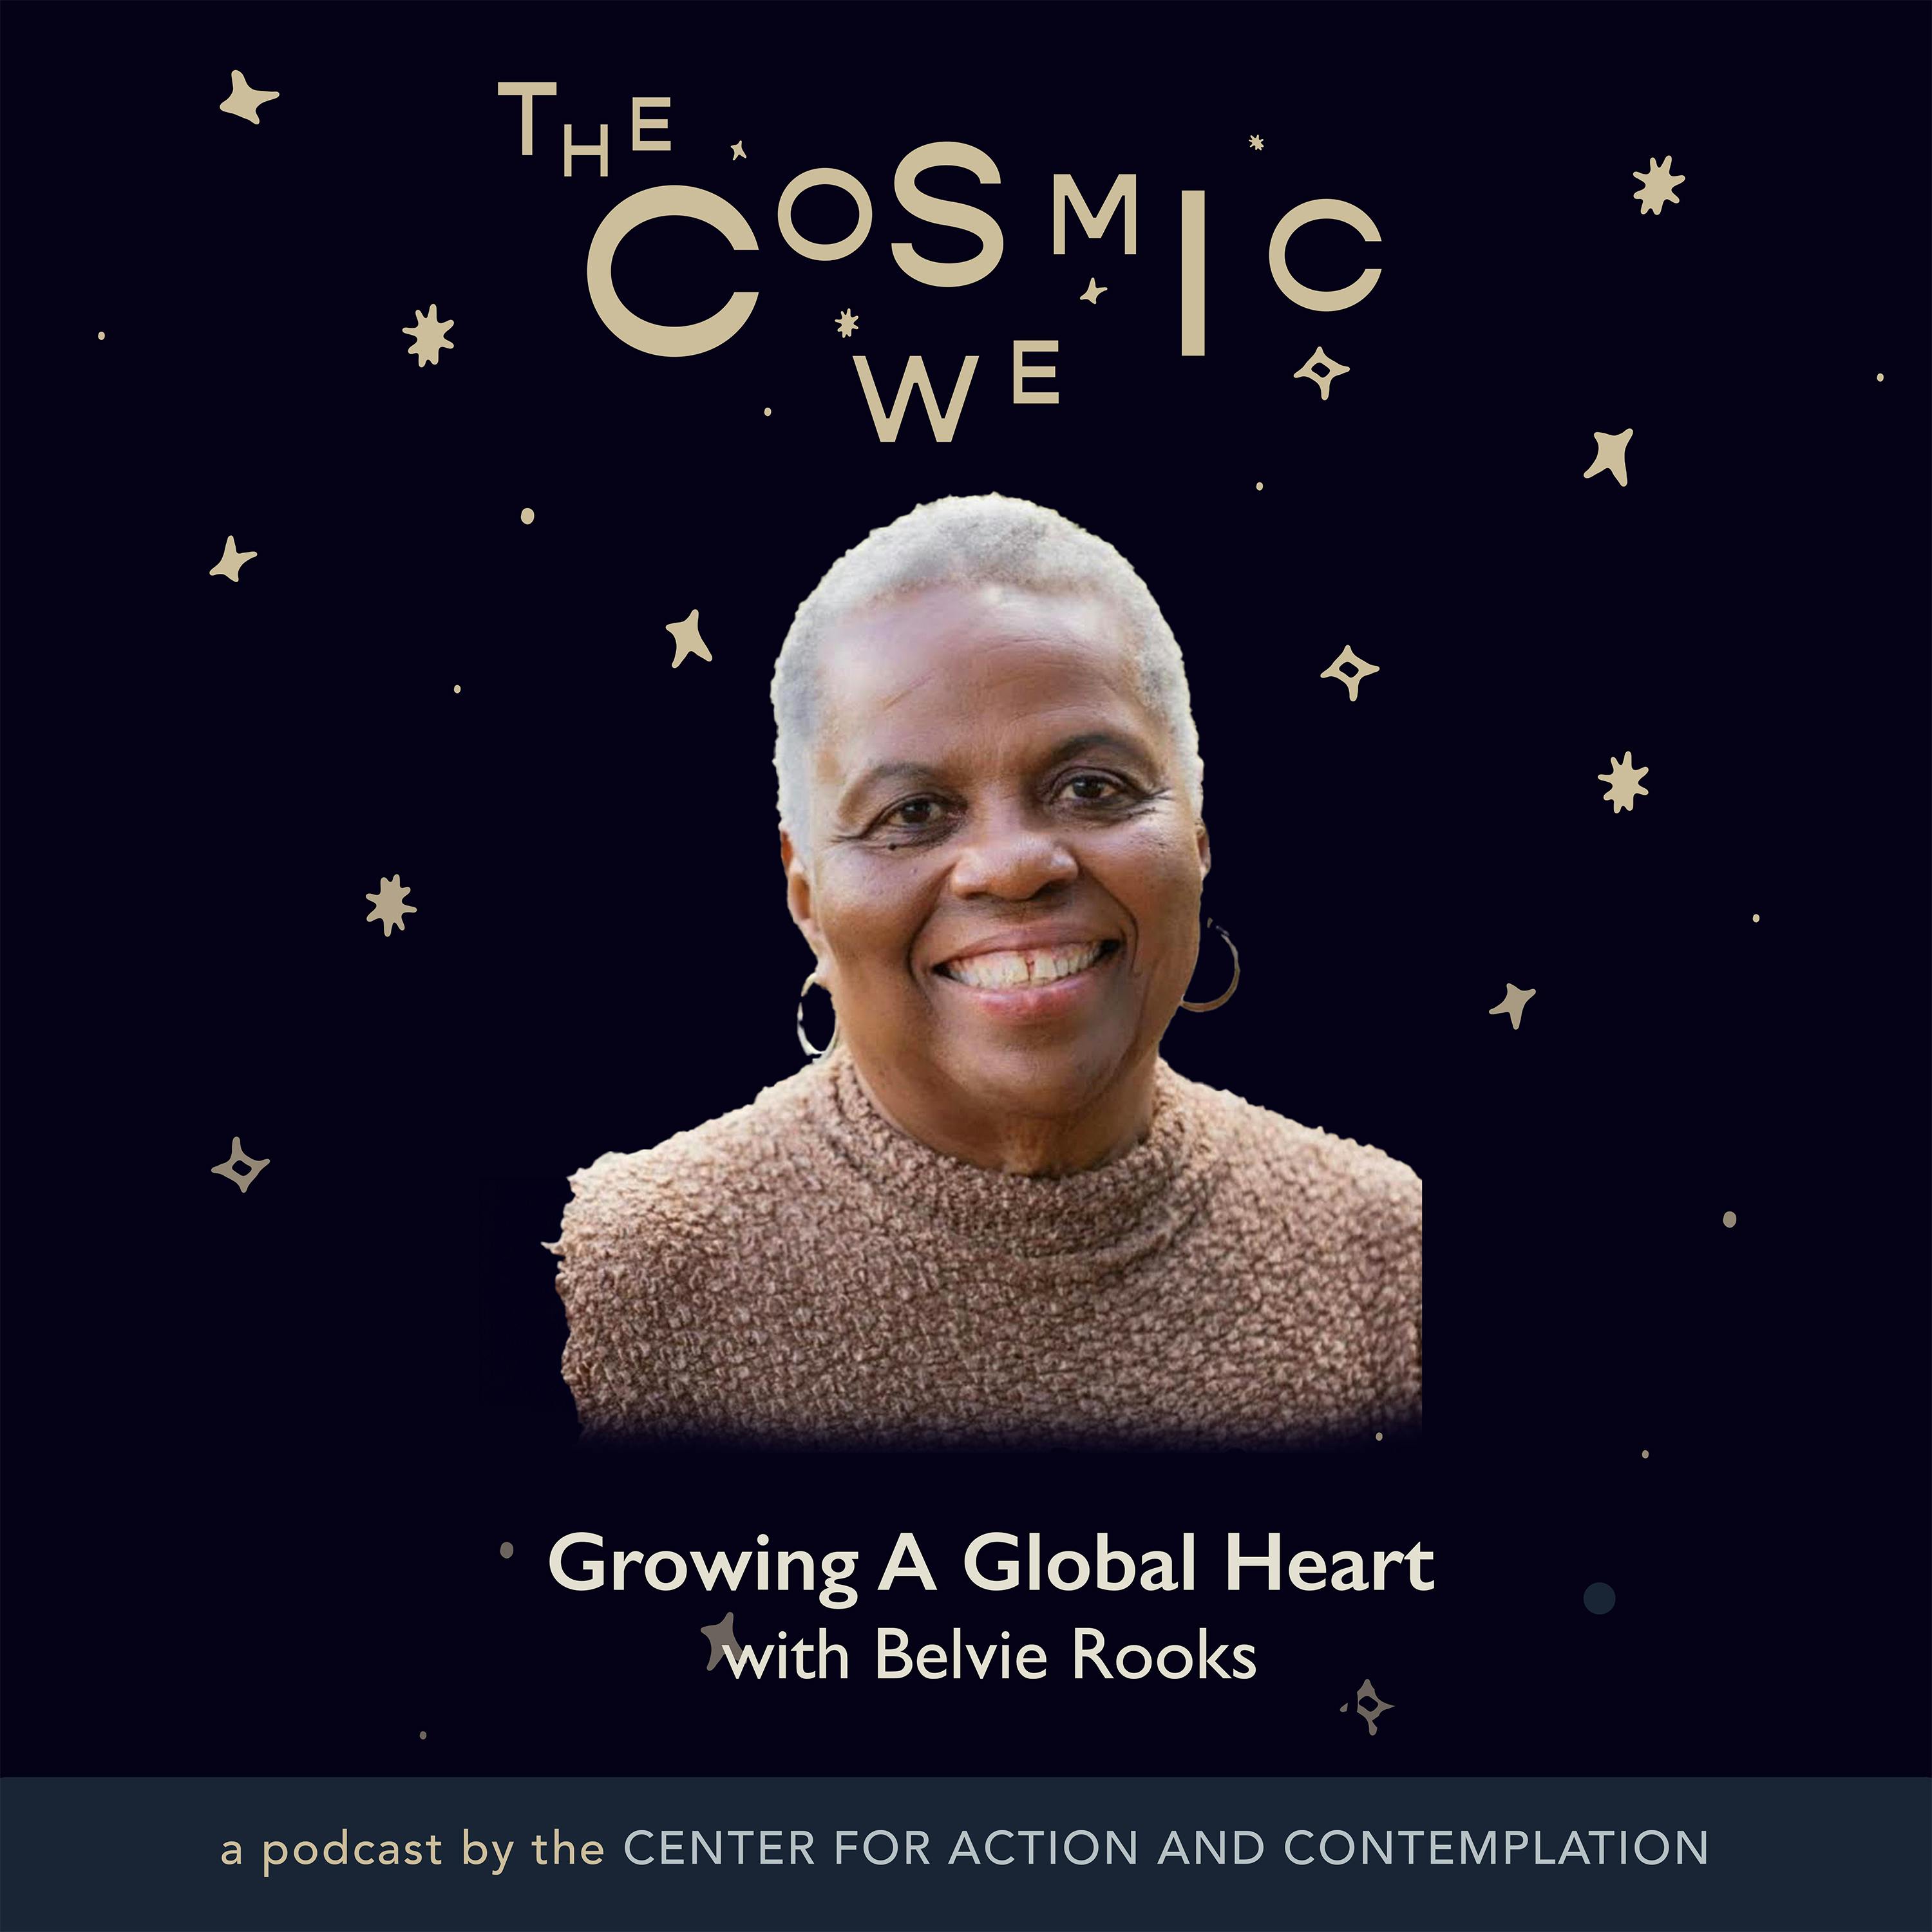 Growing a Global Heart with Belvie Rooks